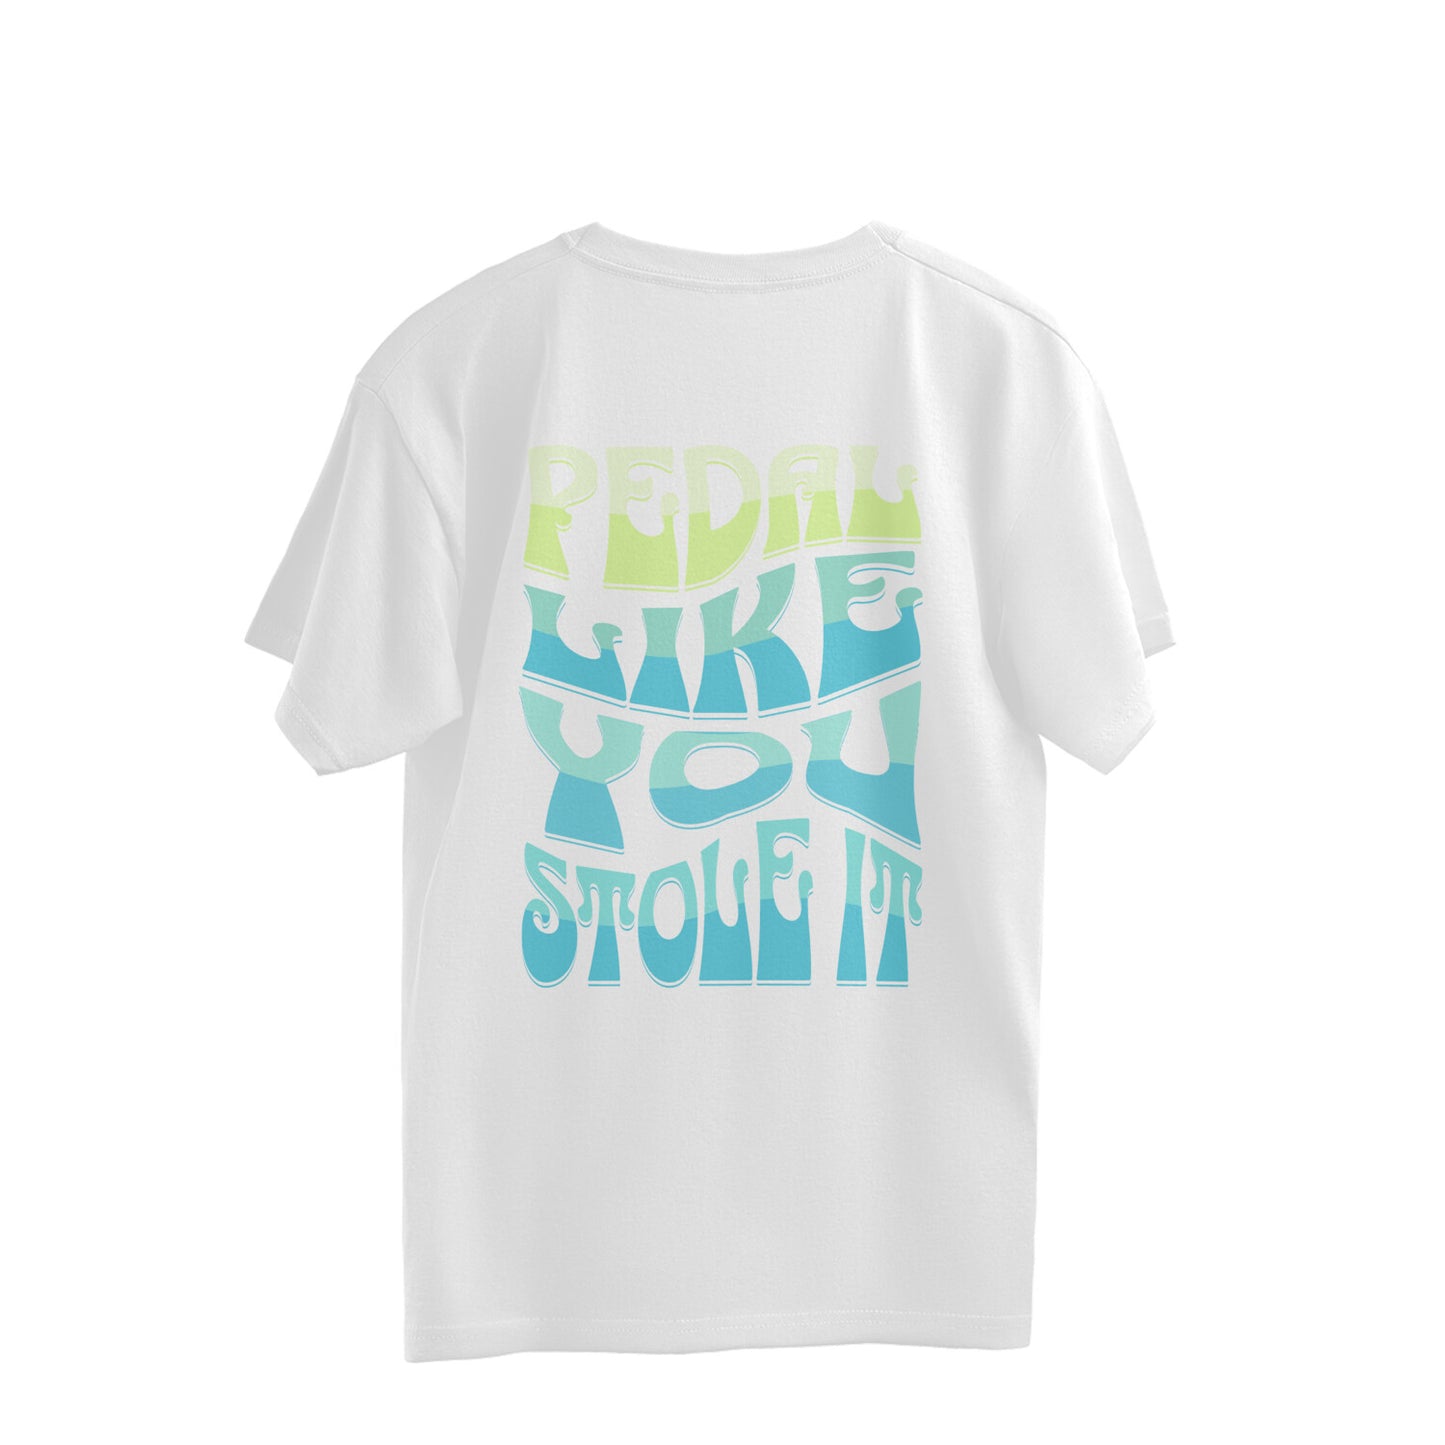 Pedal Like You Stole It Overhalf T-shirt